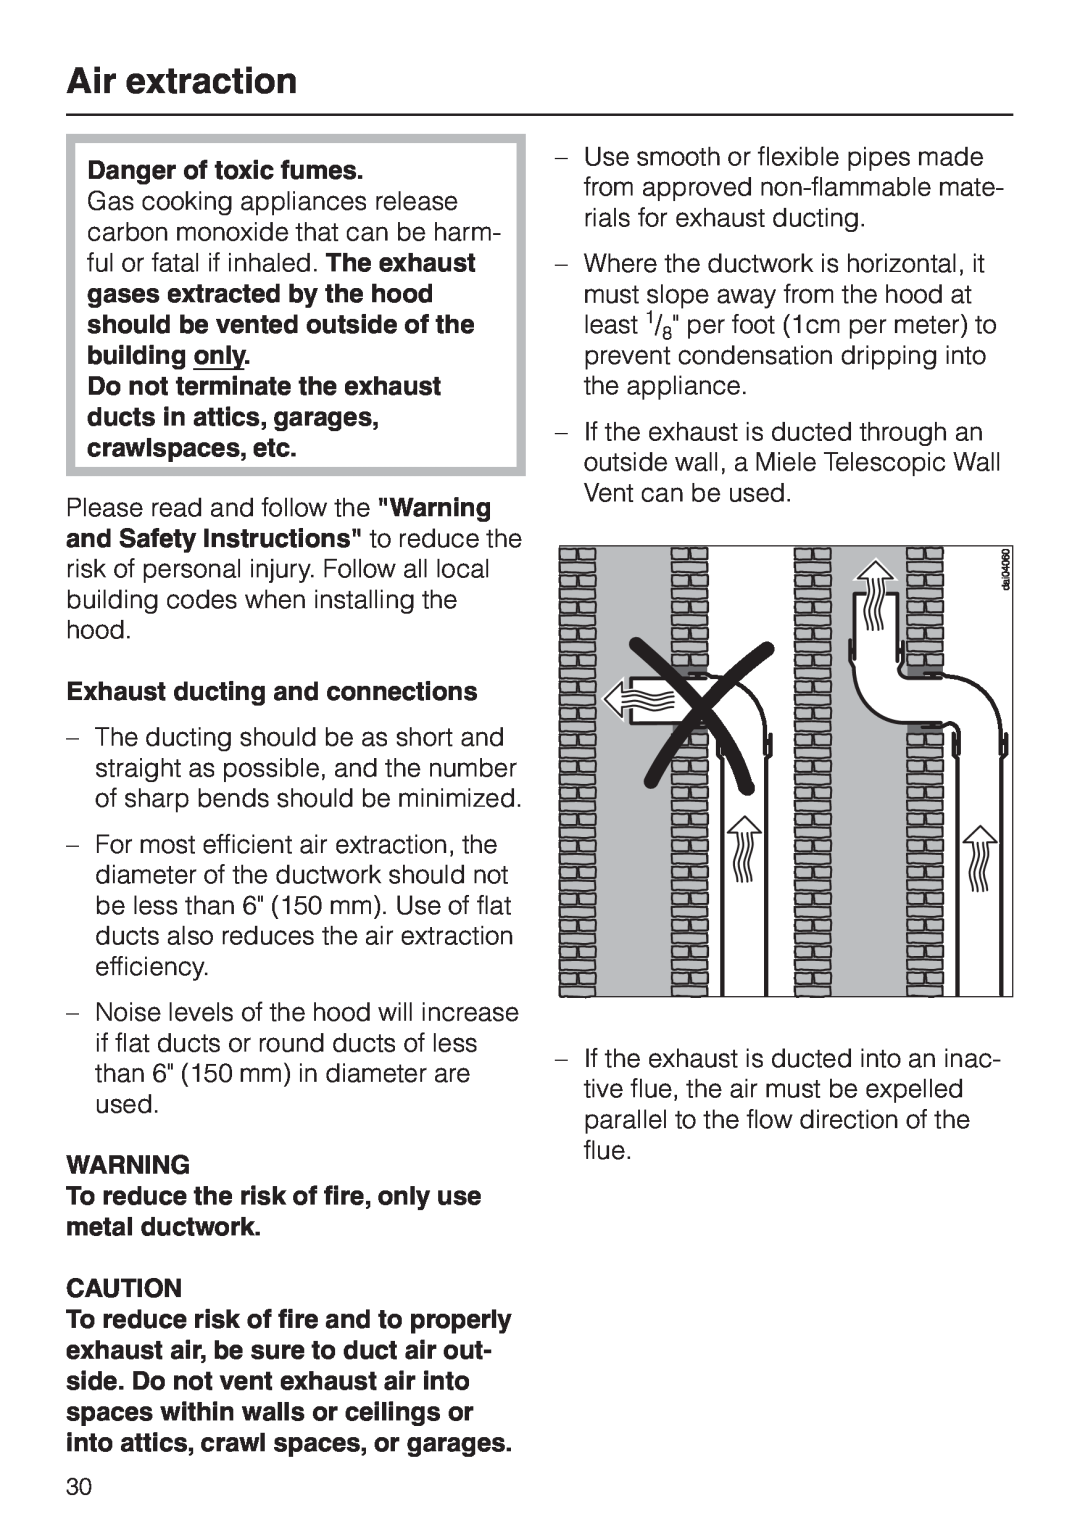 Miele DA 230-3 installation instructions Air extraction, Danger of toxic fumes, Exhaust ducting and connections 